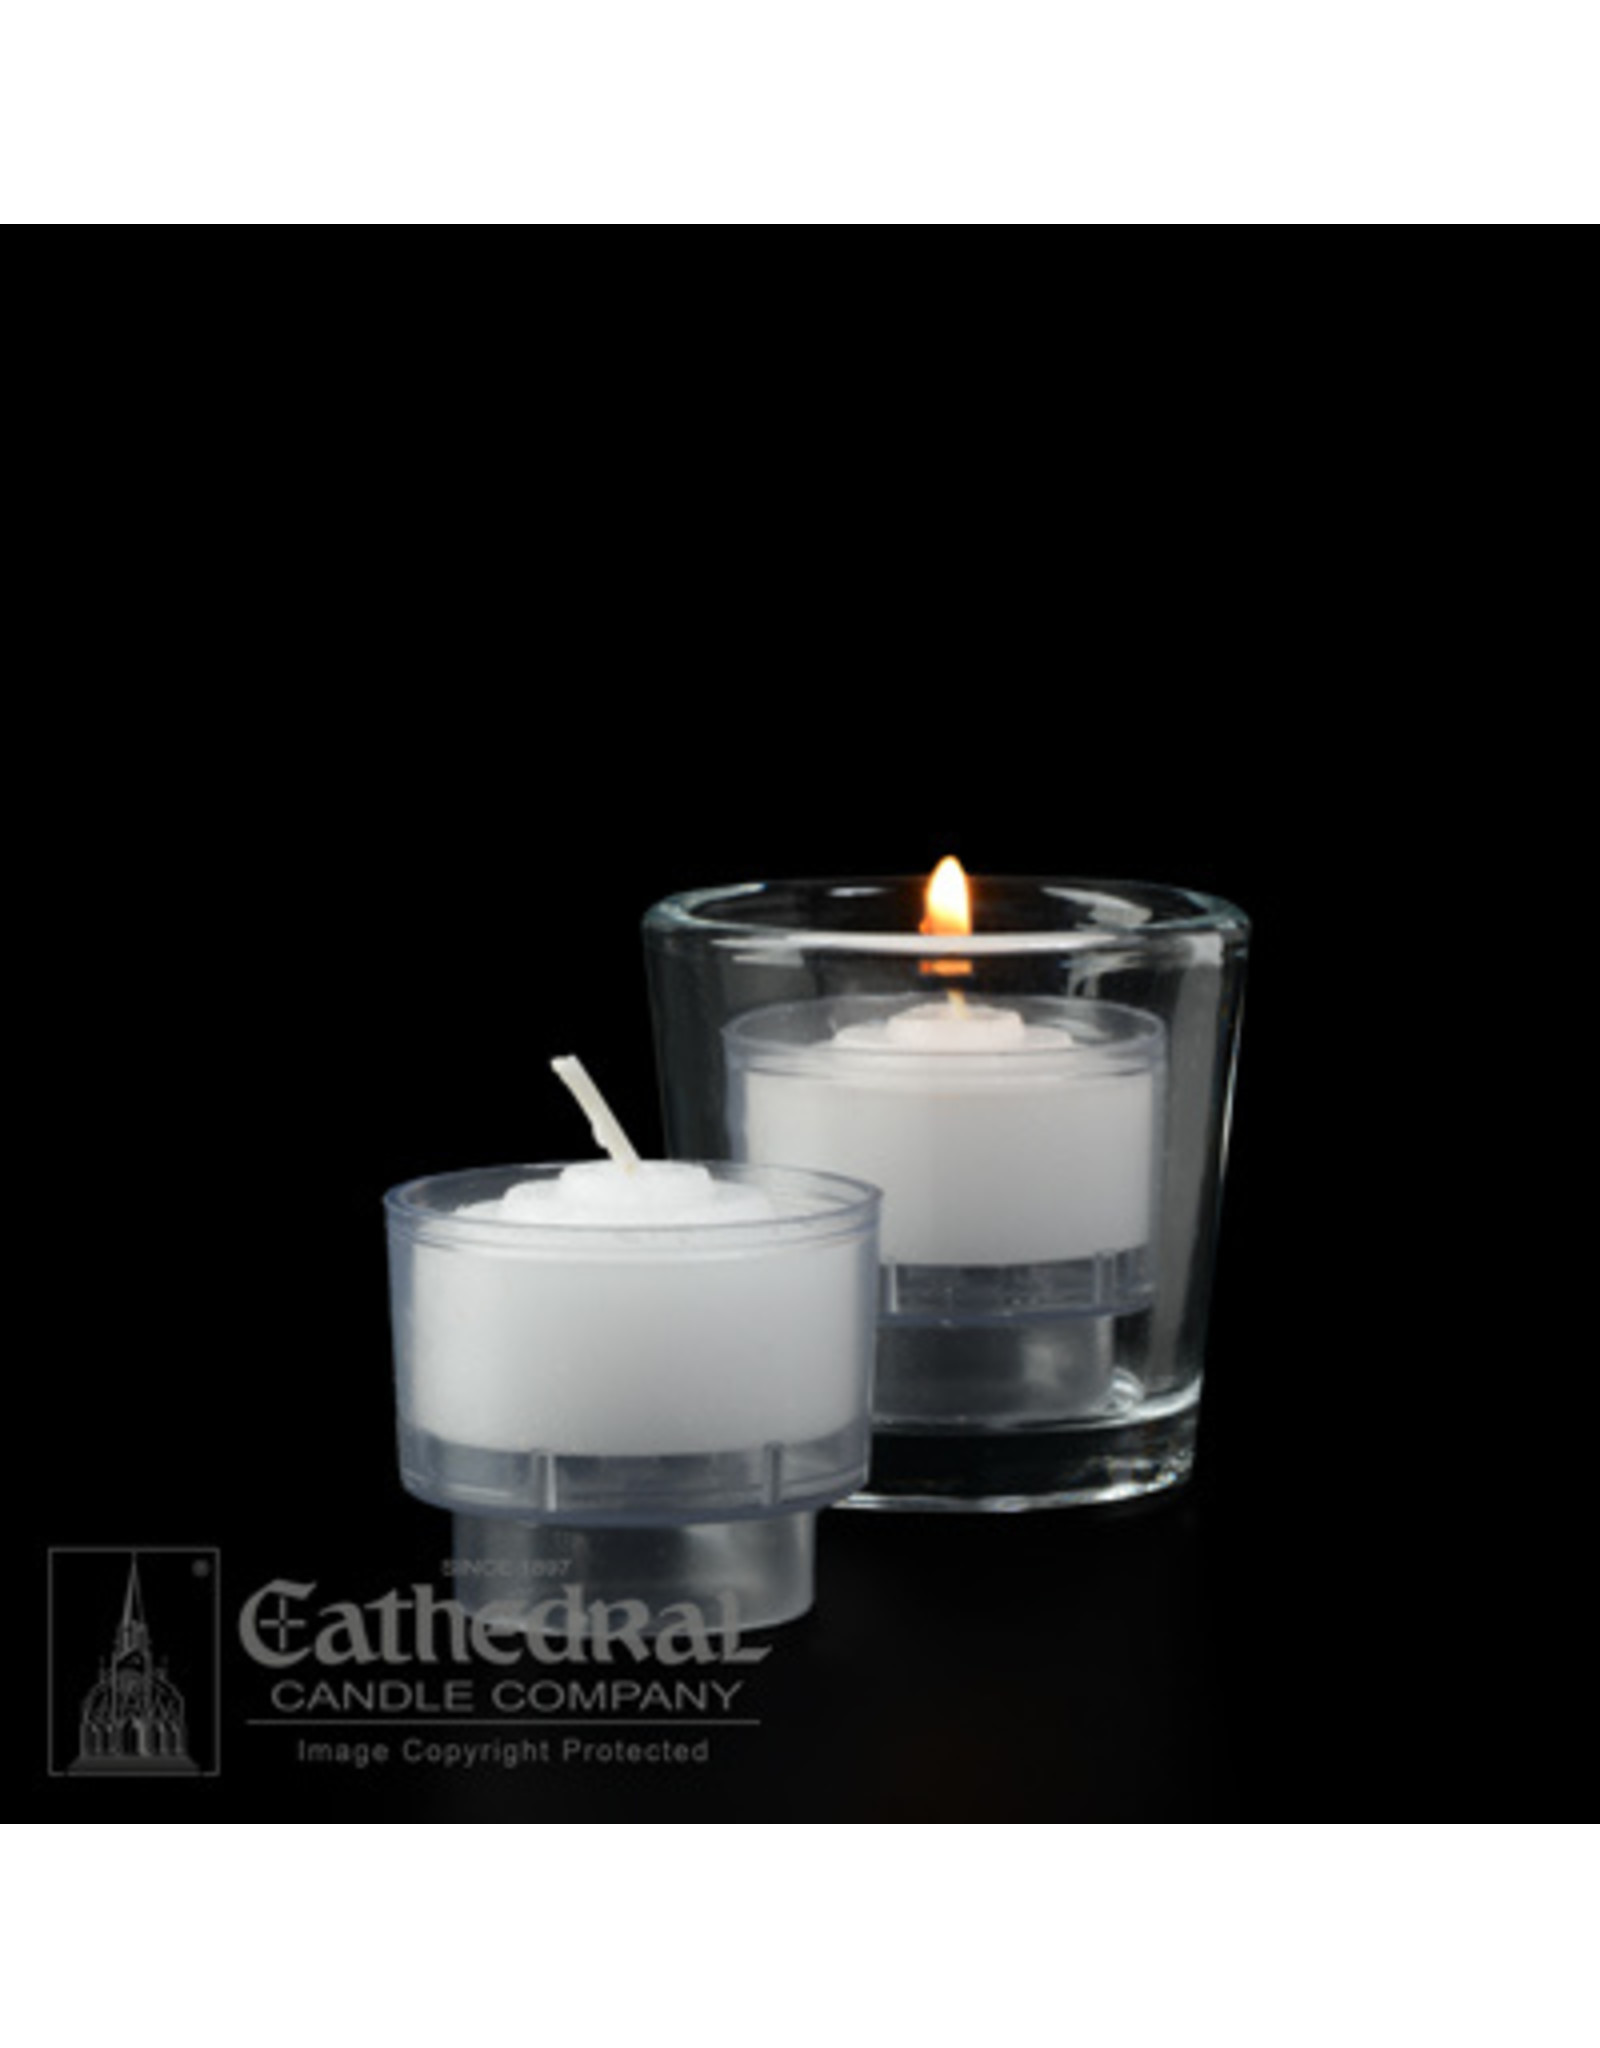 Cathedral Candle 4-Hour Crystal Votive ez-Lite Candles (Case of 2 Boxes)